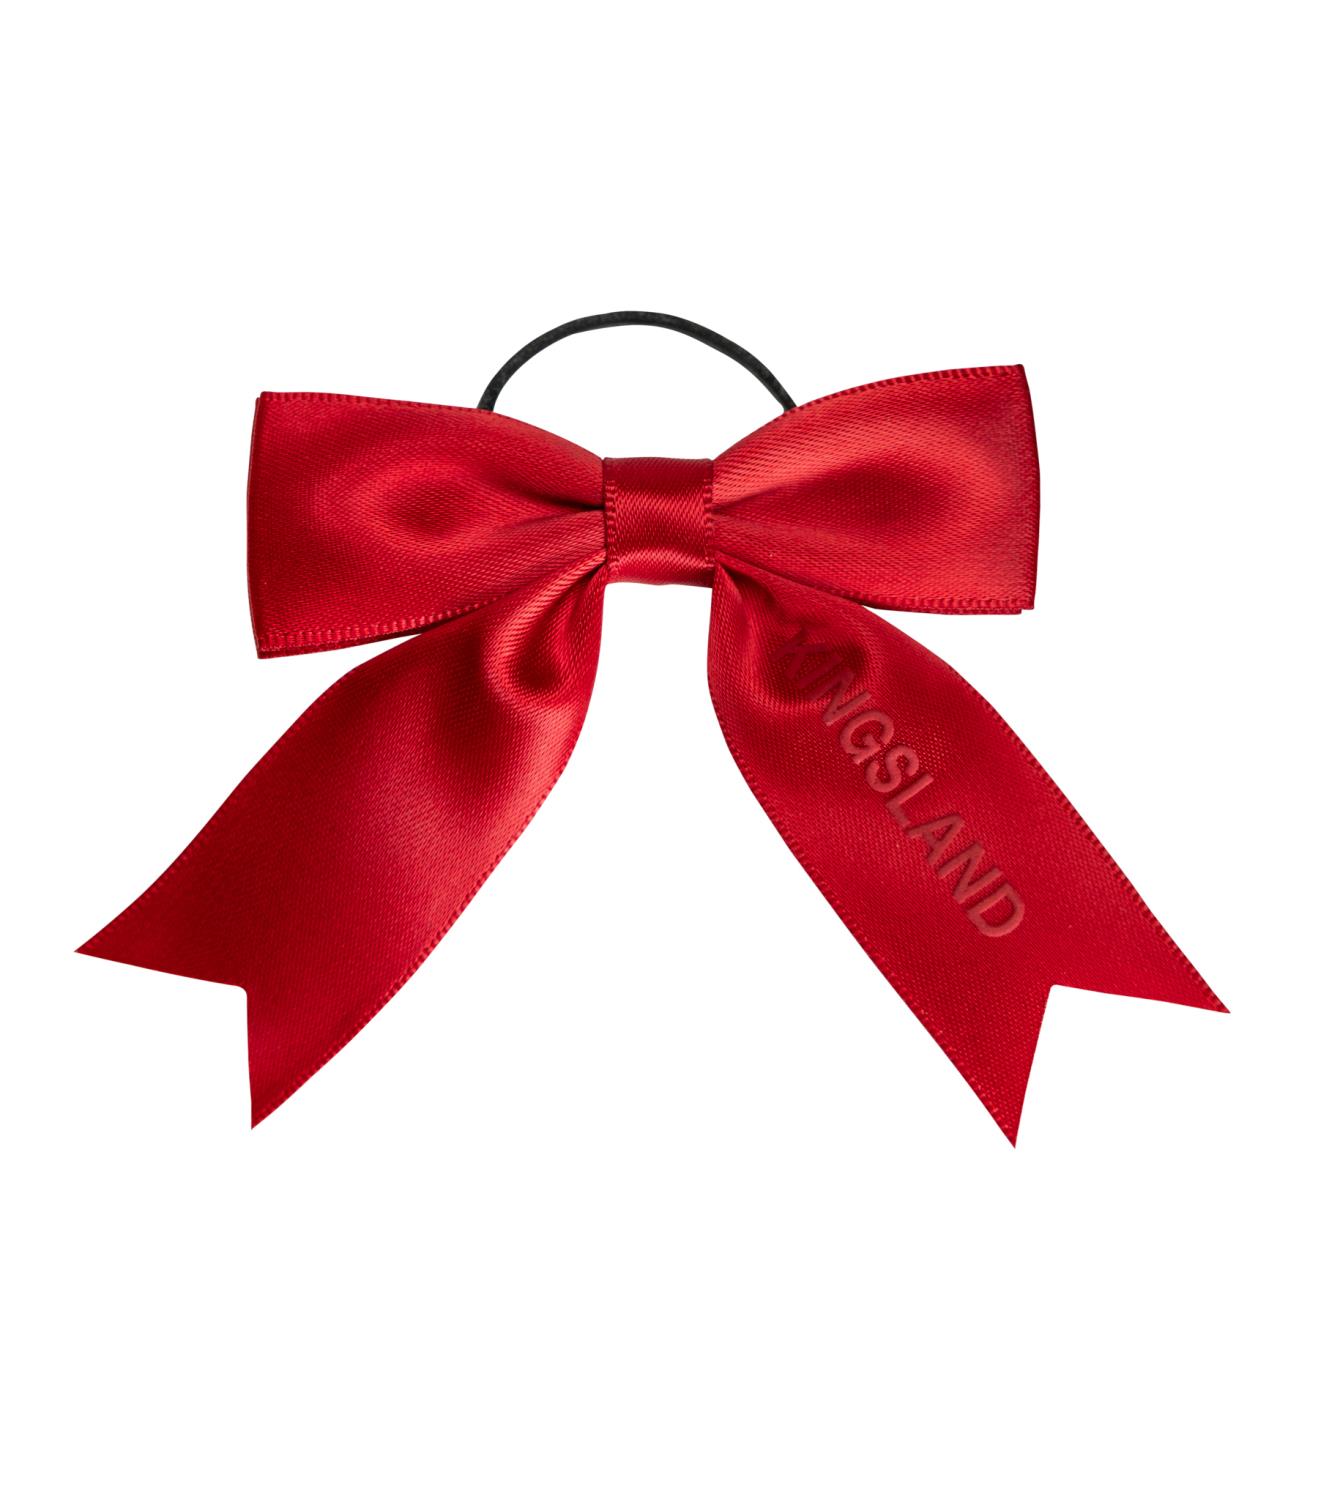 KLHADLEIGH RED BOW